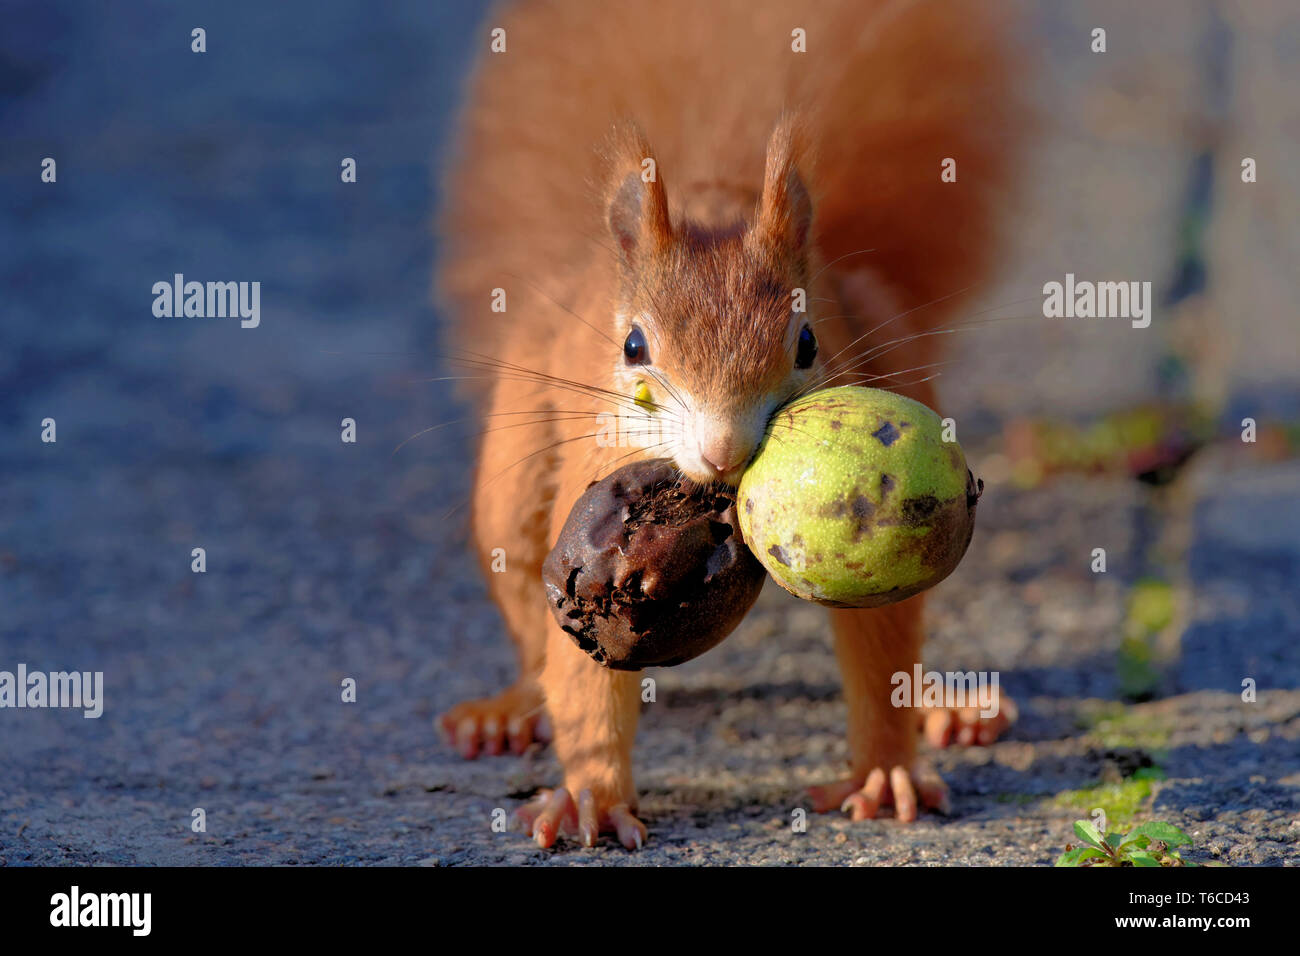 Red Squirrel with walnuts Stock Photo